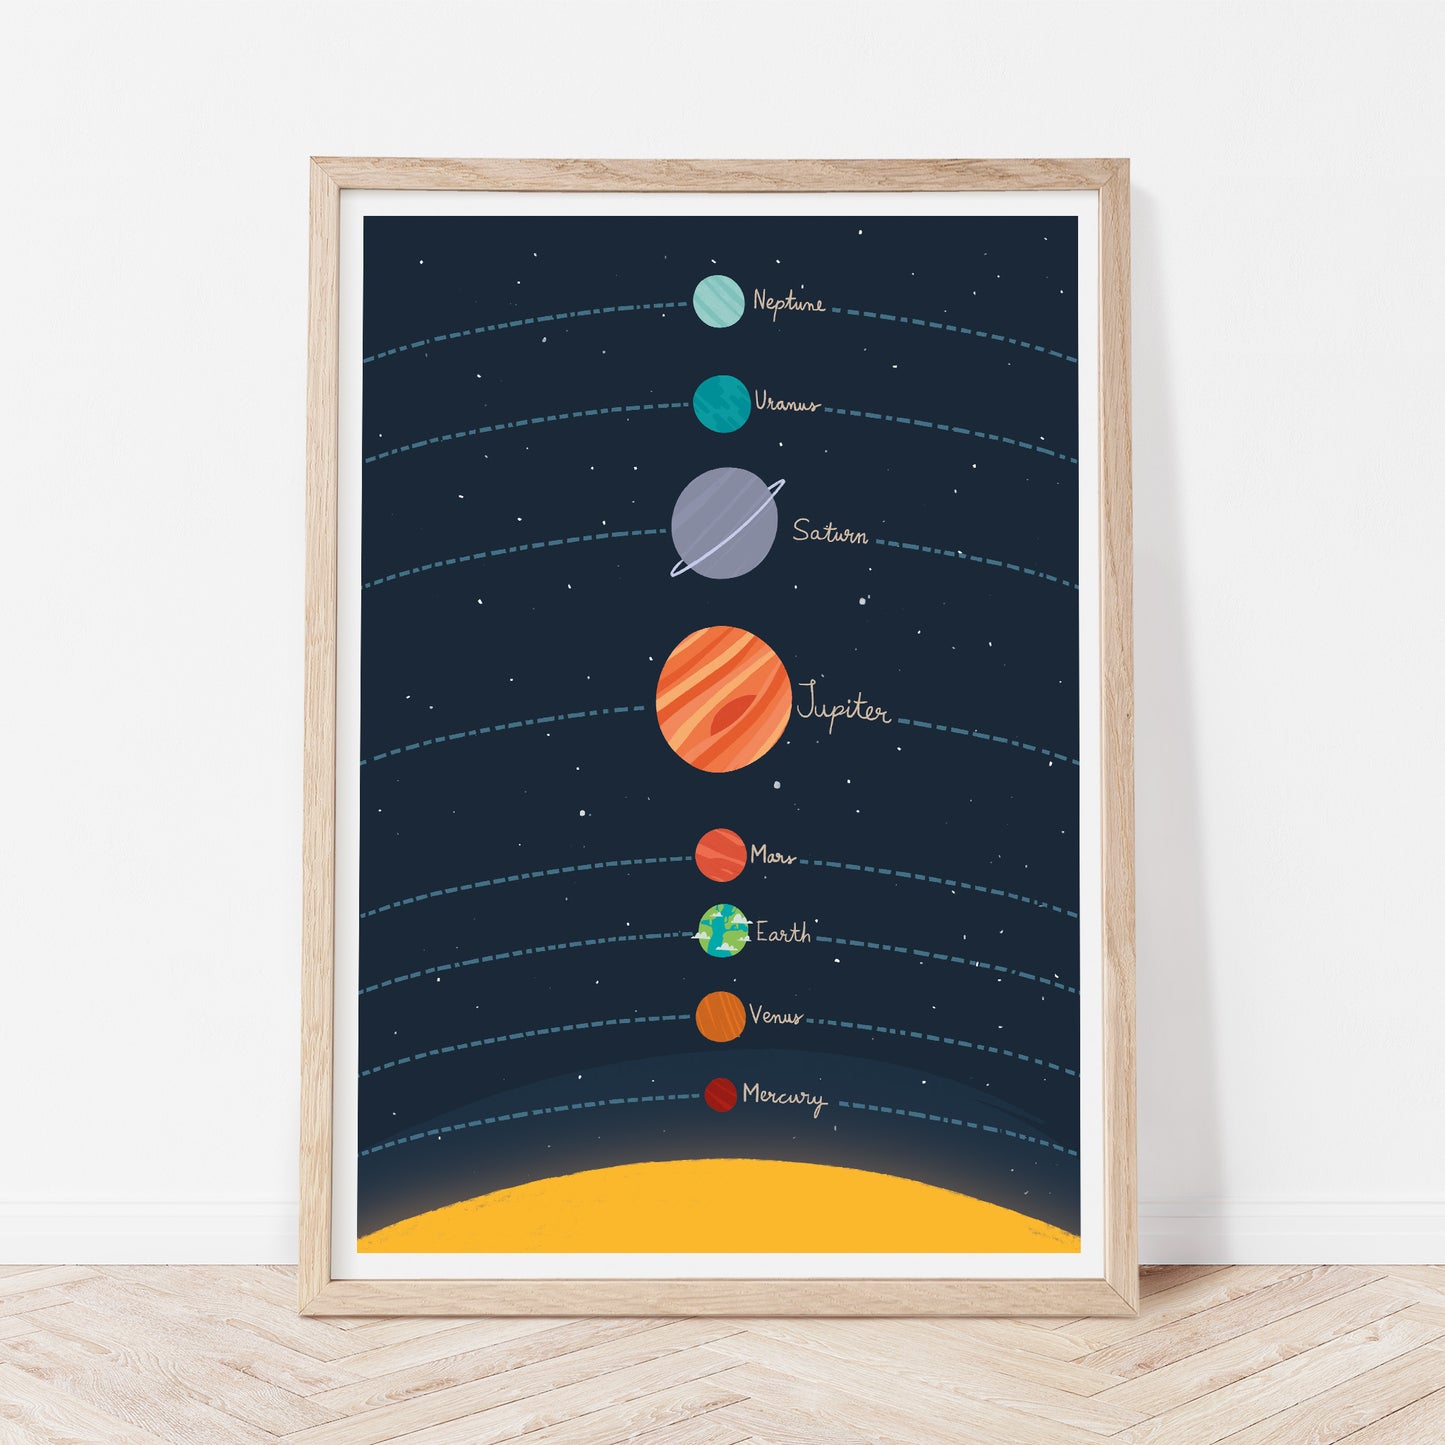 Planets of the solar system in navy blue